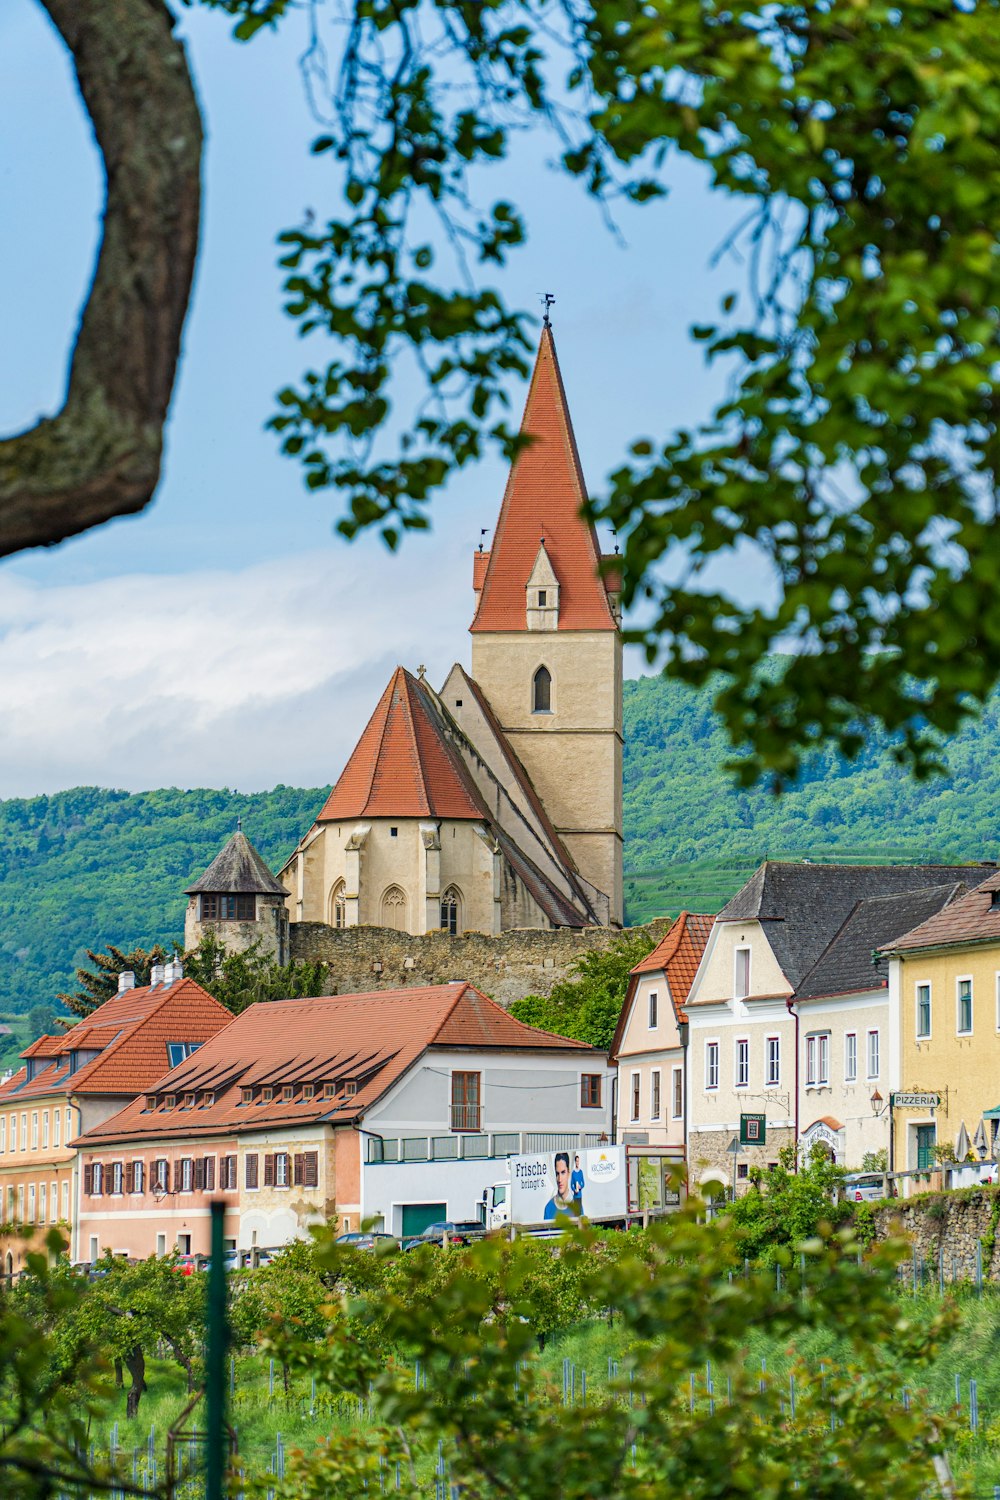 a view of a town with a church on top of a hill